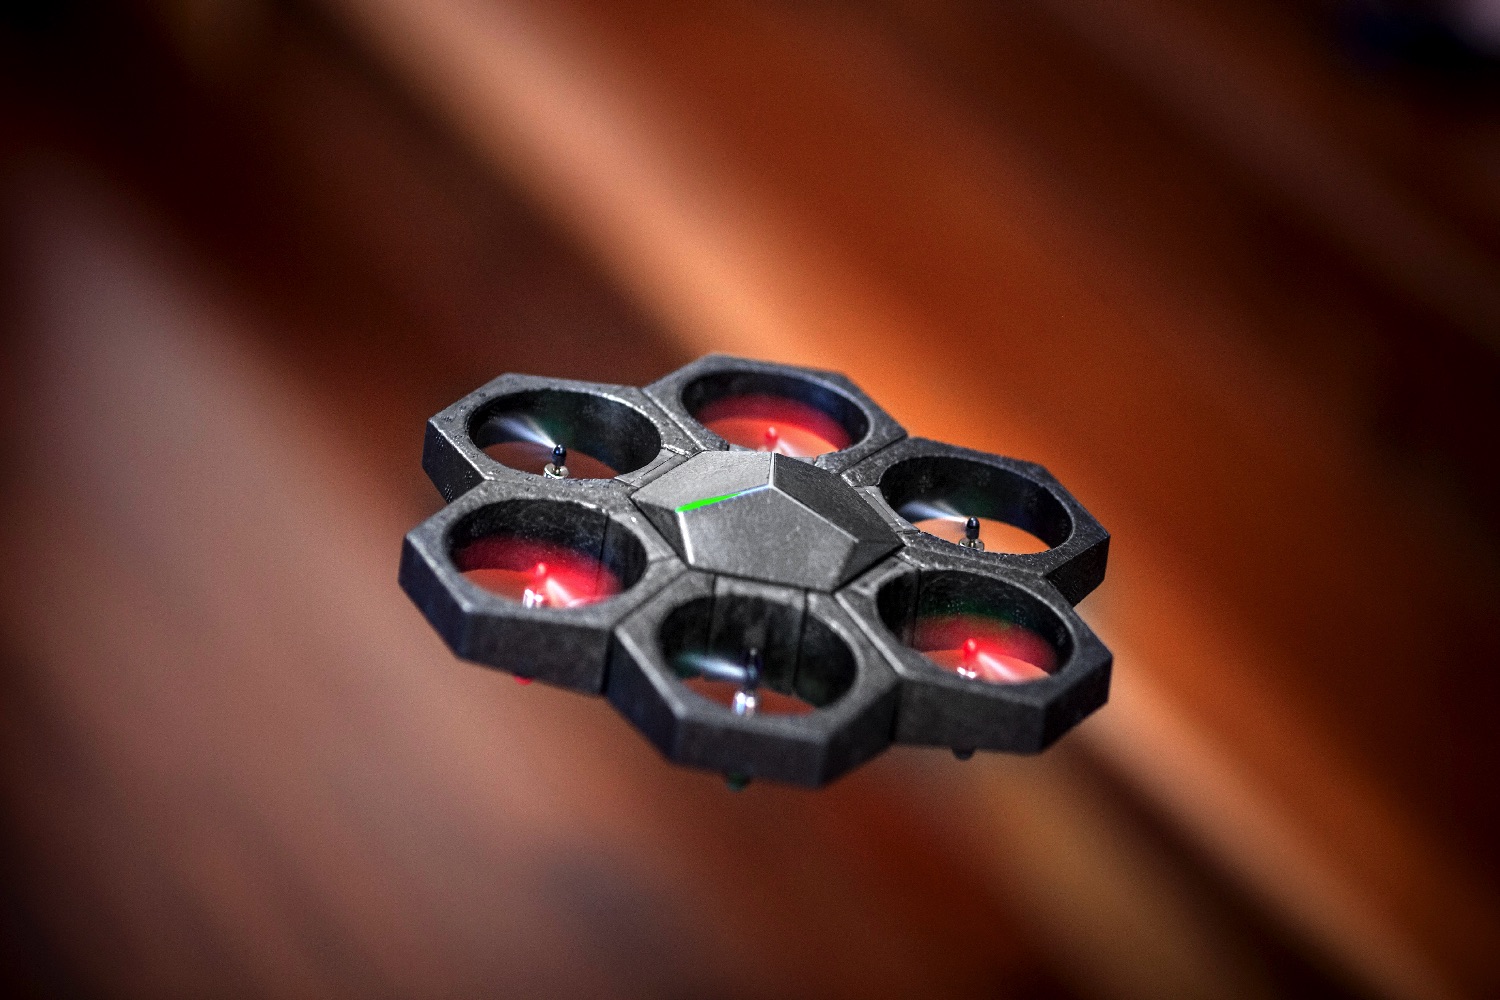 airblock modular drone flying in the air